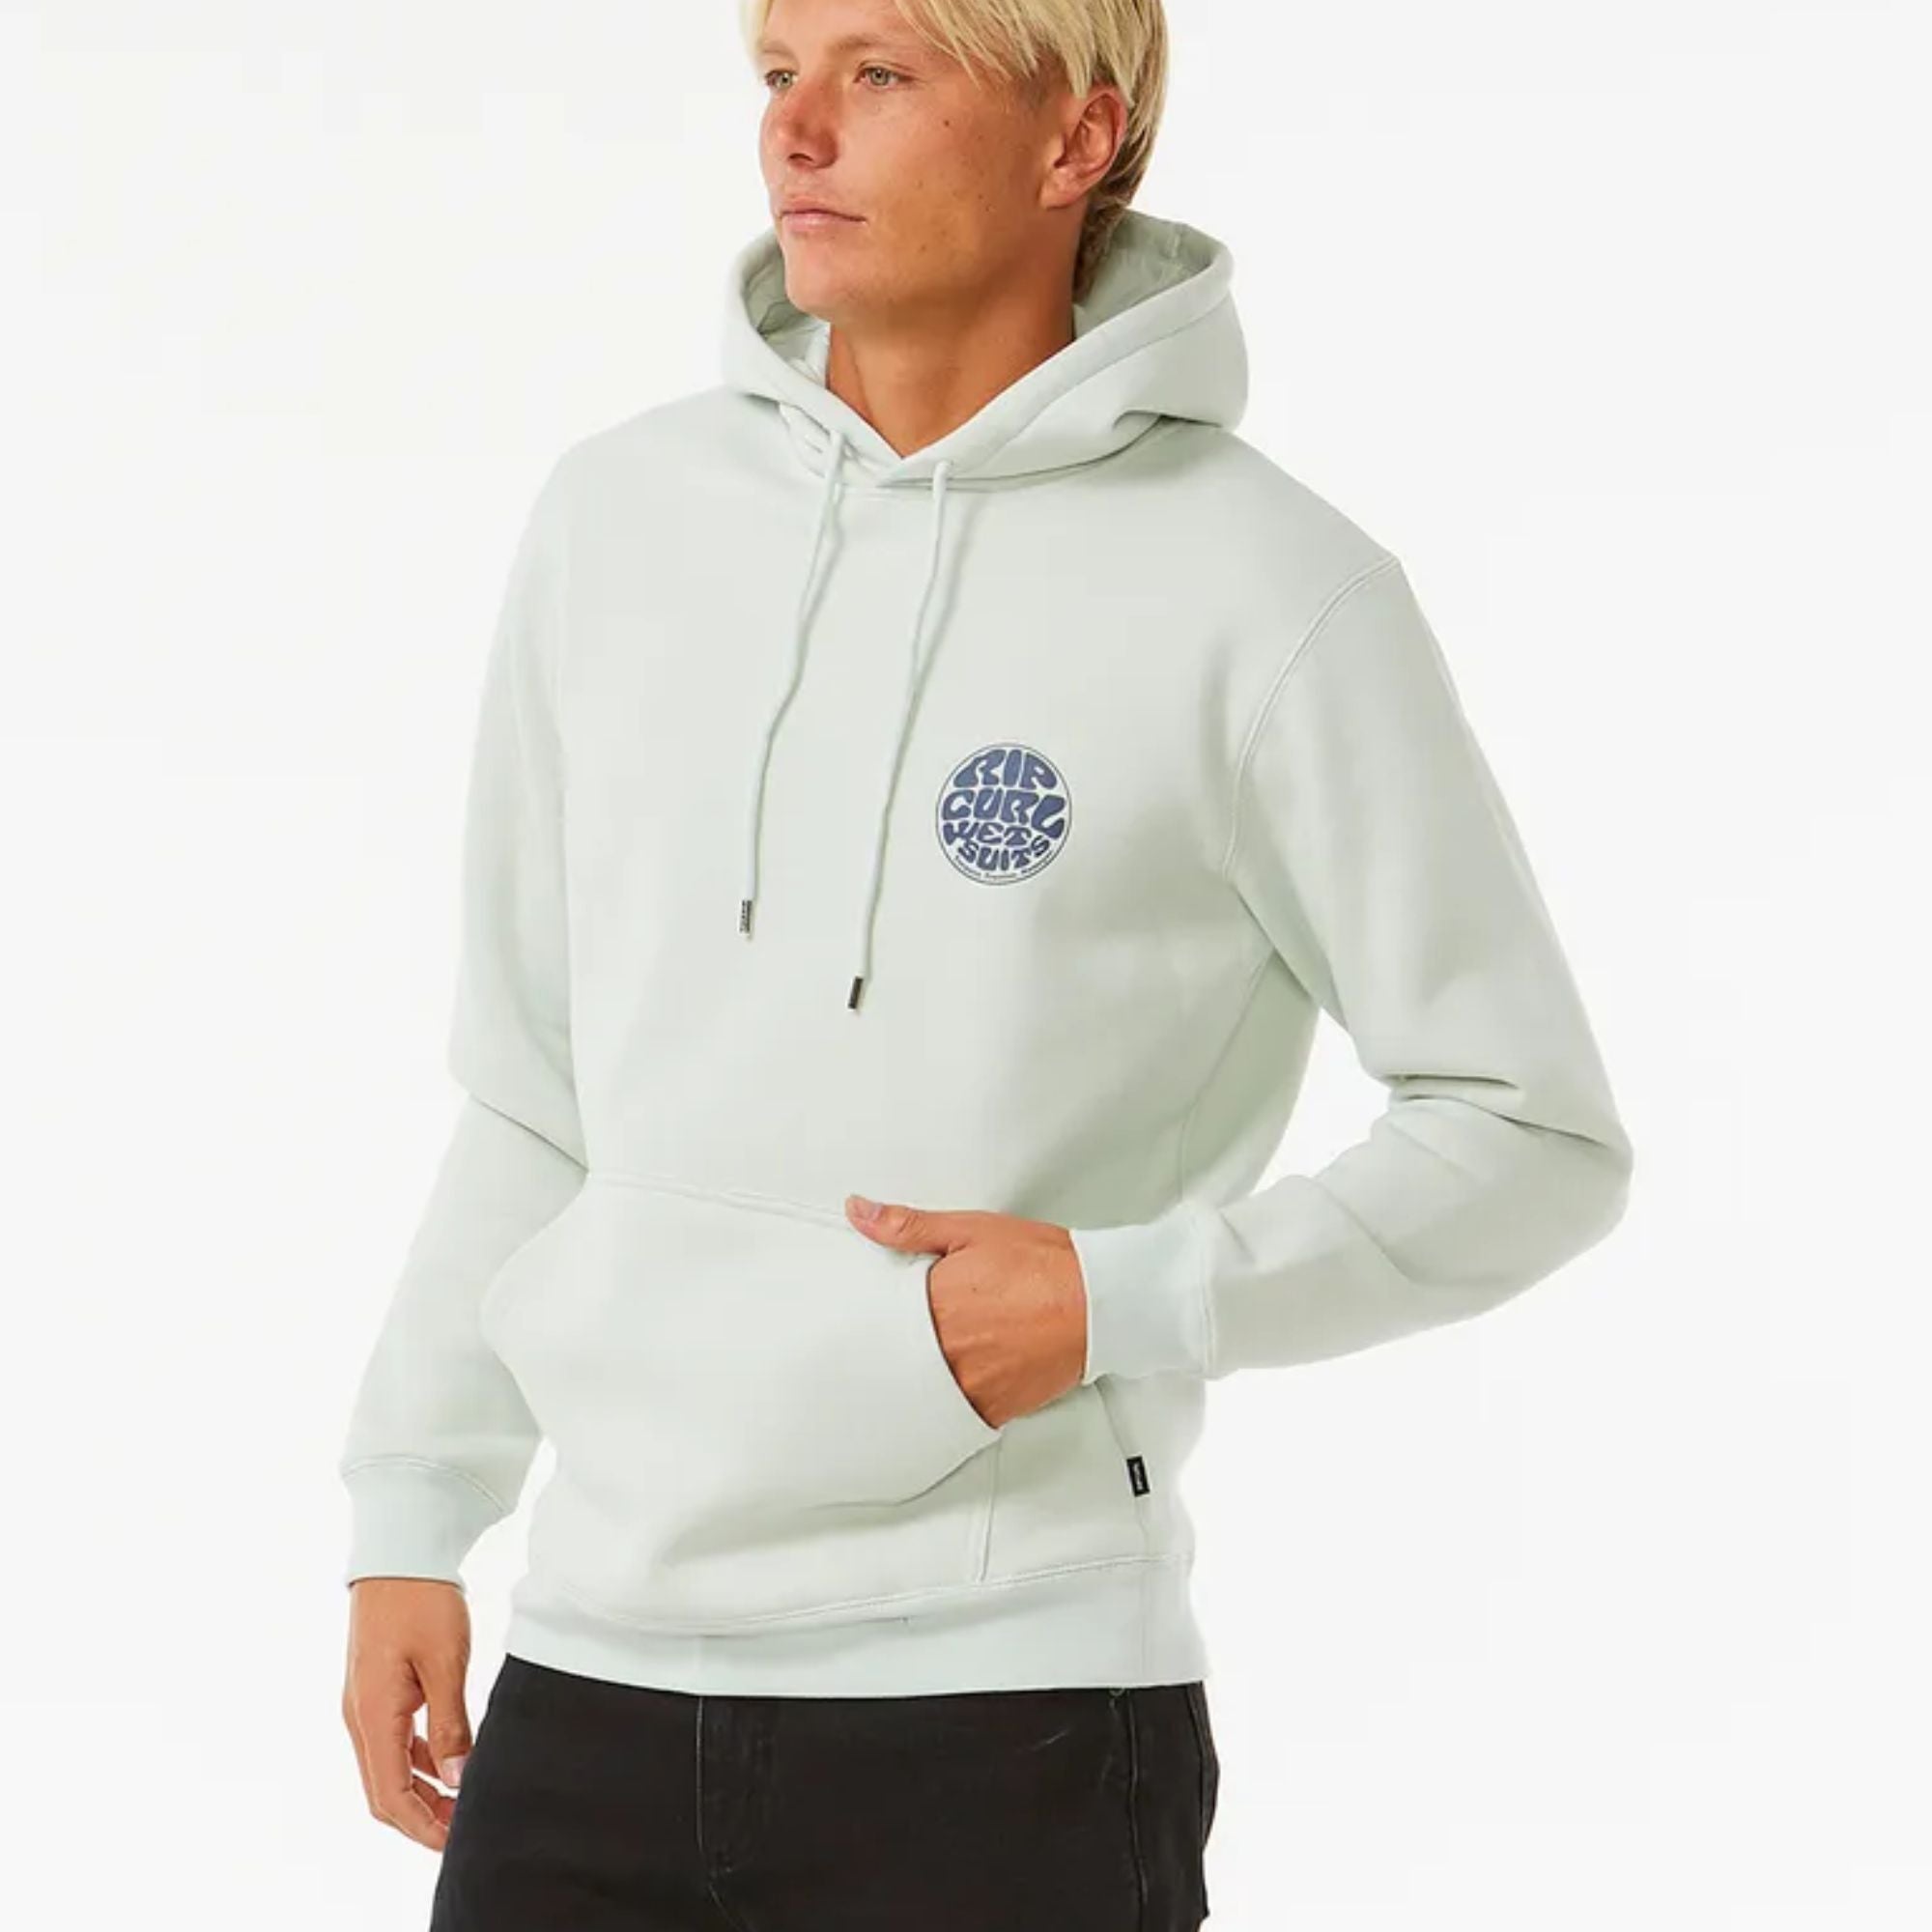 Ripcurl Wetsuit Icon Hoody | RIPCURL | Portwest - The Outdoor Shop